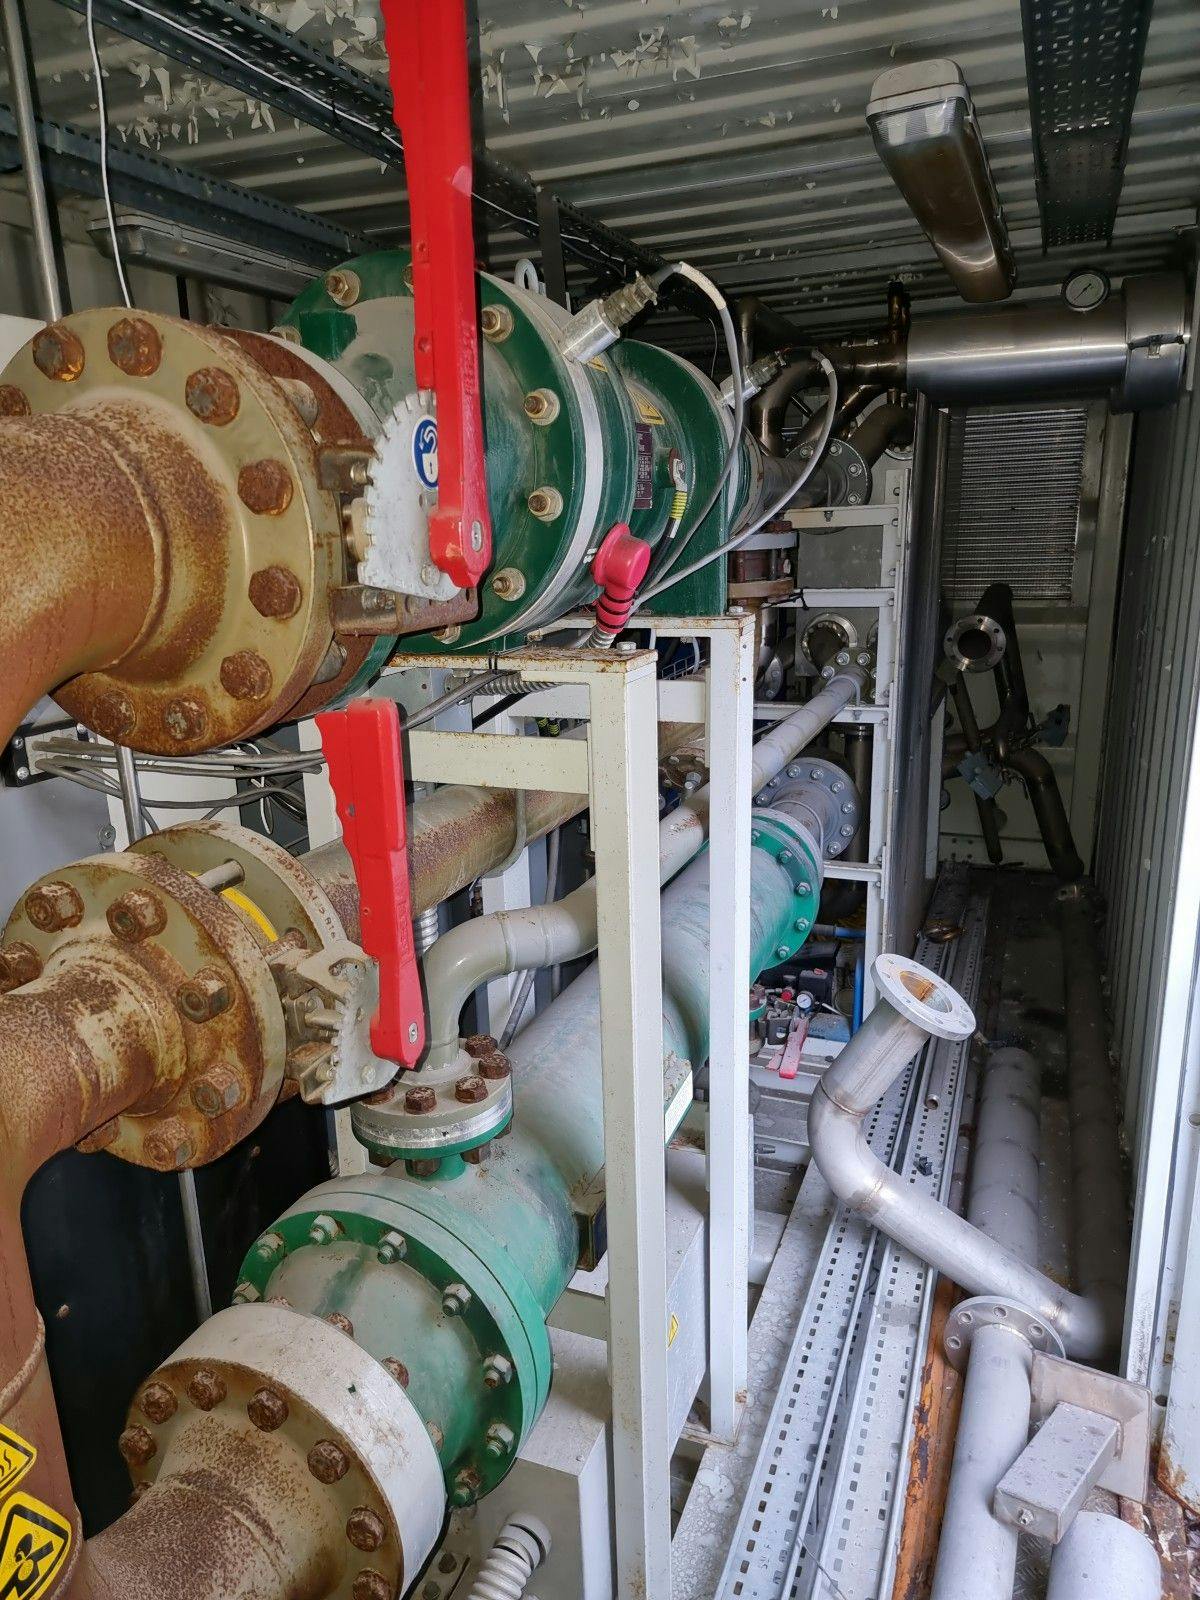 Calnetix containerised 1Photo of 2 x GE Calnetix containerised ORC with turbine an dheat exchangers - organic rankine cycle